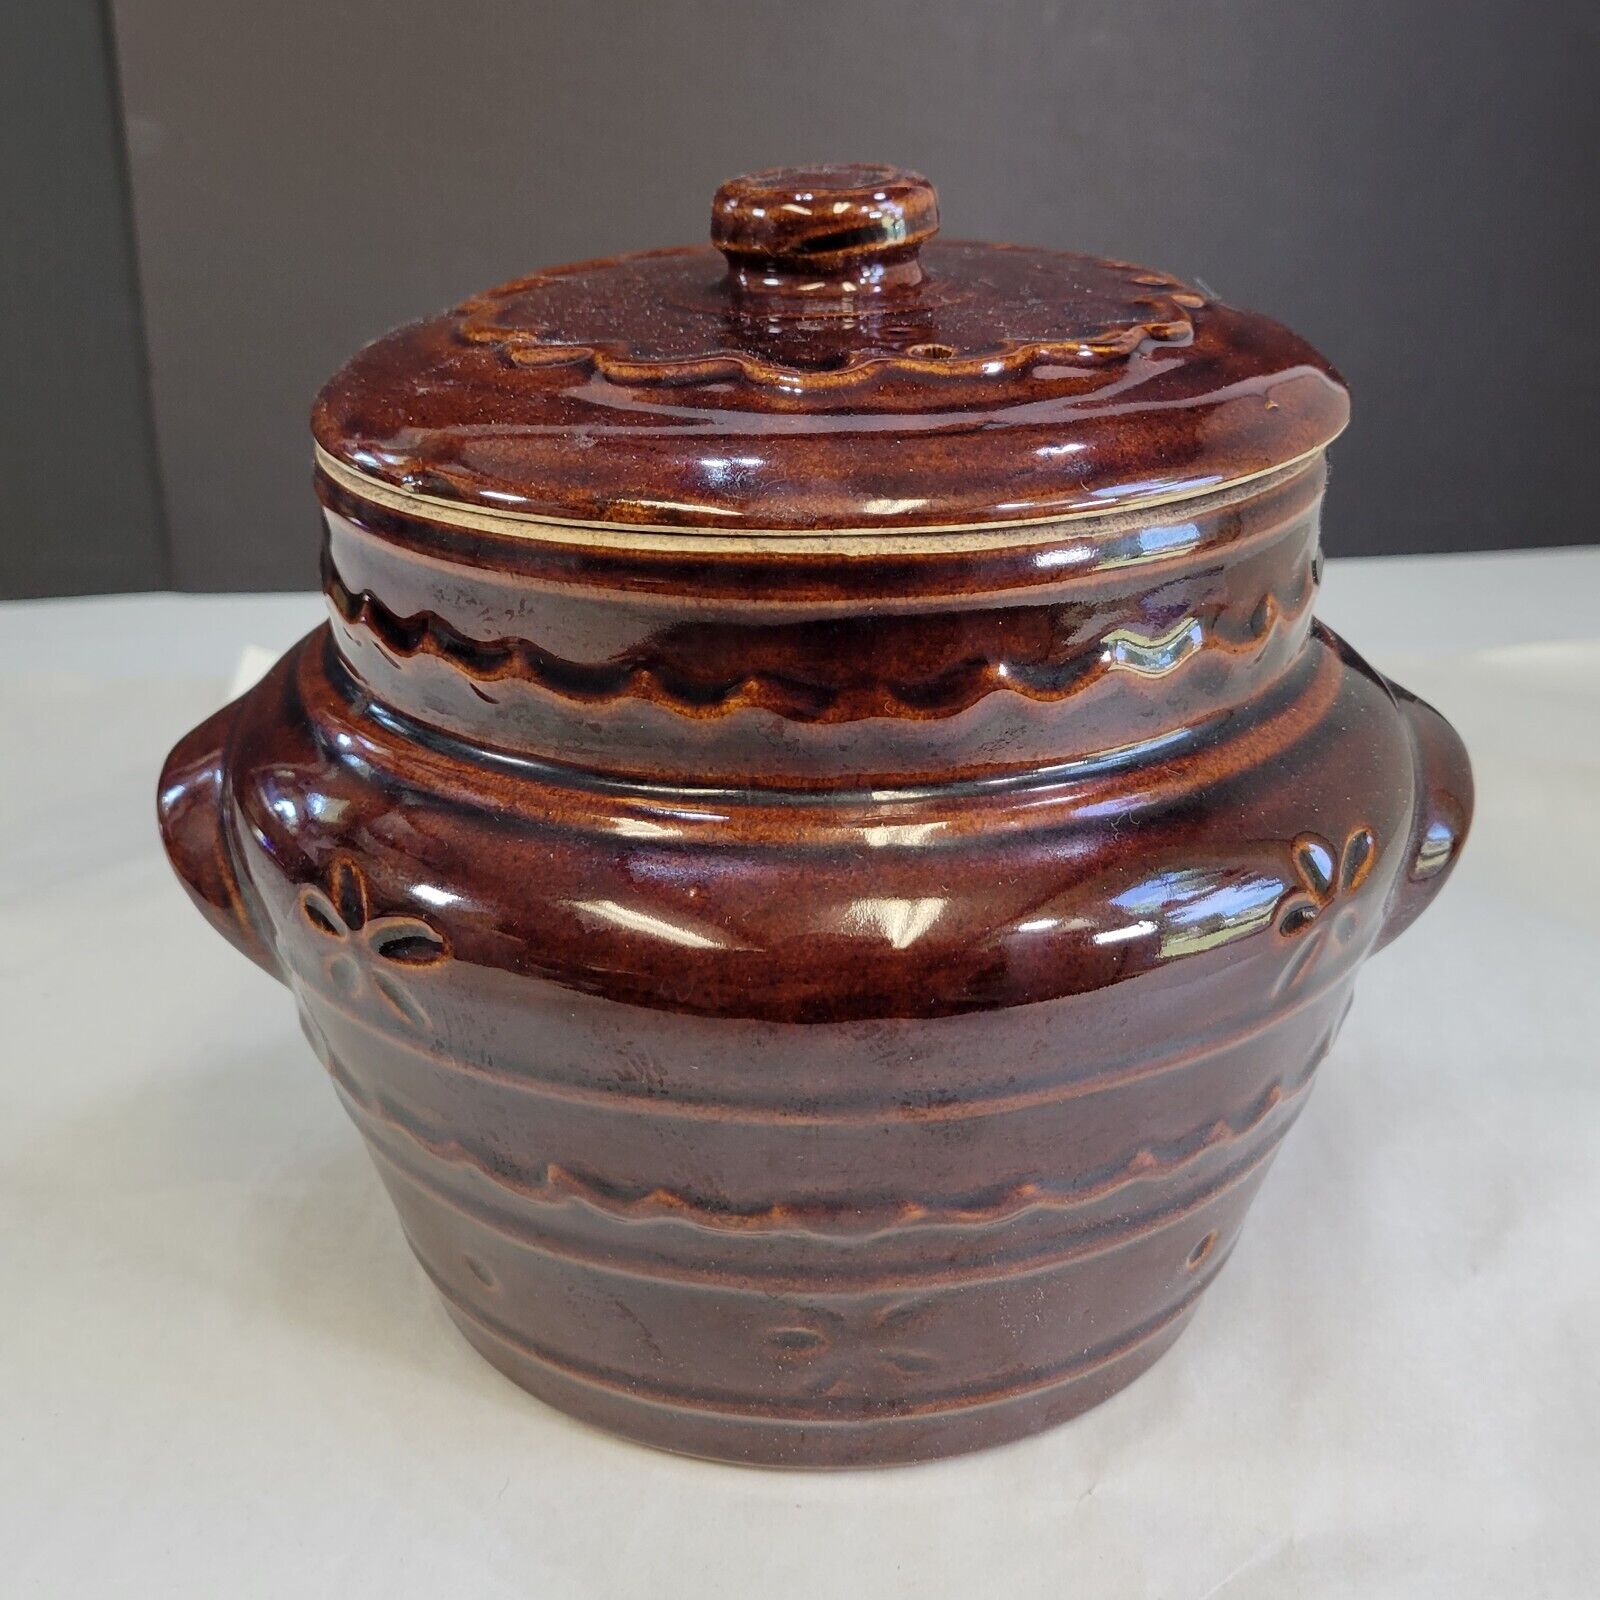 Marcrest USA Brown Daisy Dot Oven Proof Stoneware Bean Pot Lid 7